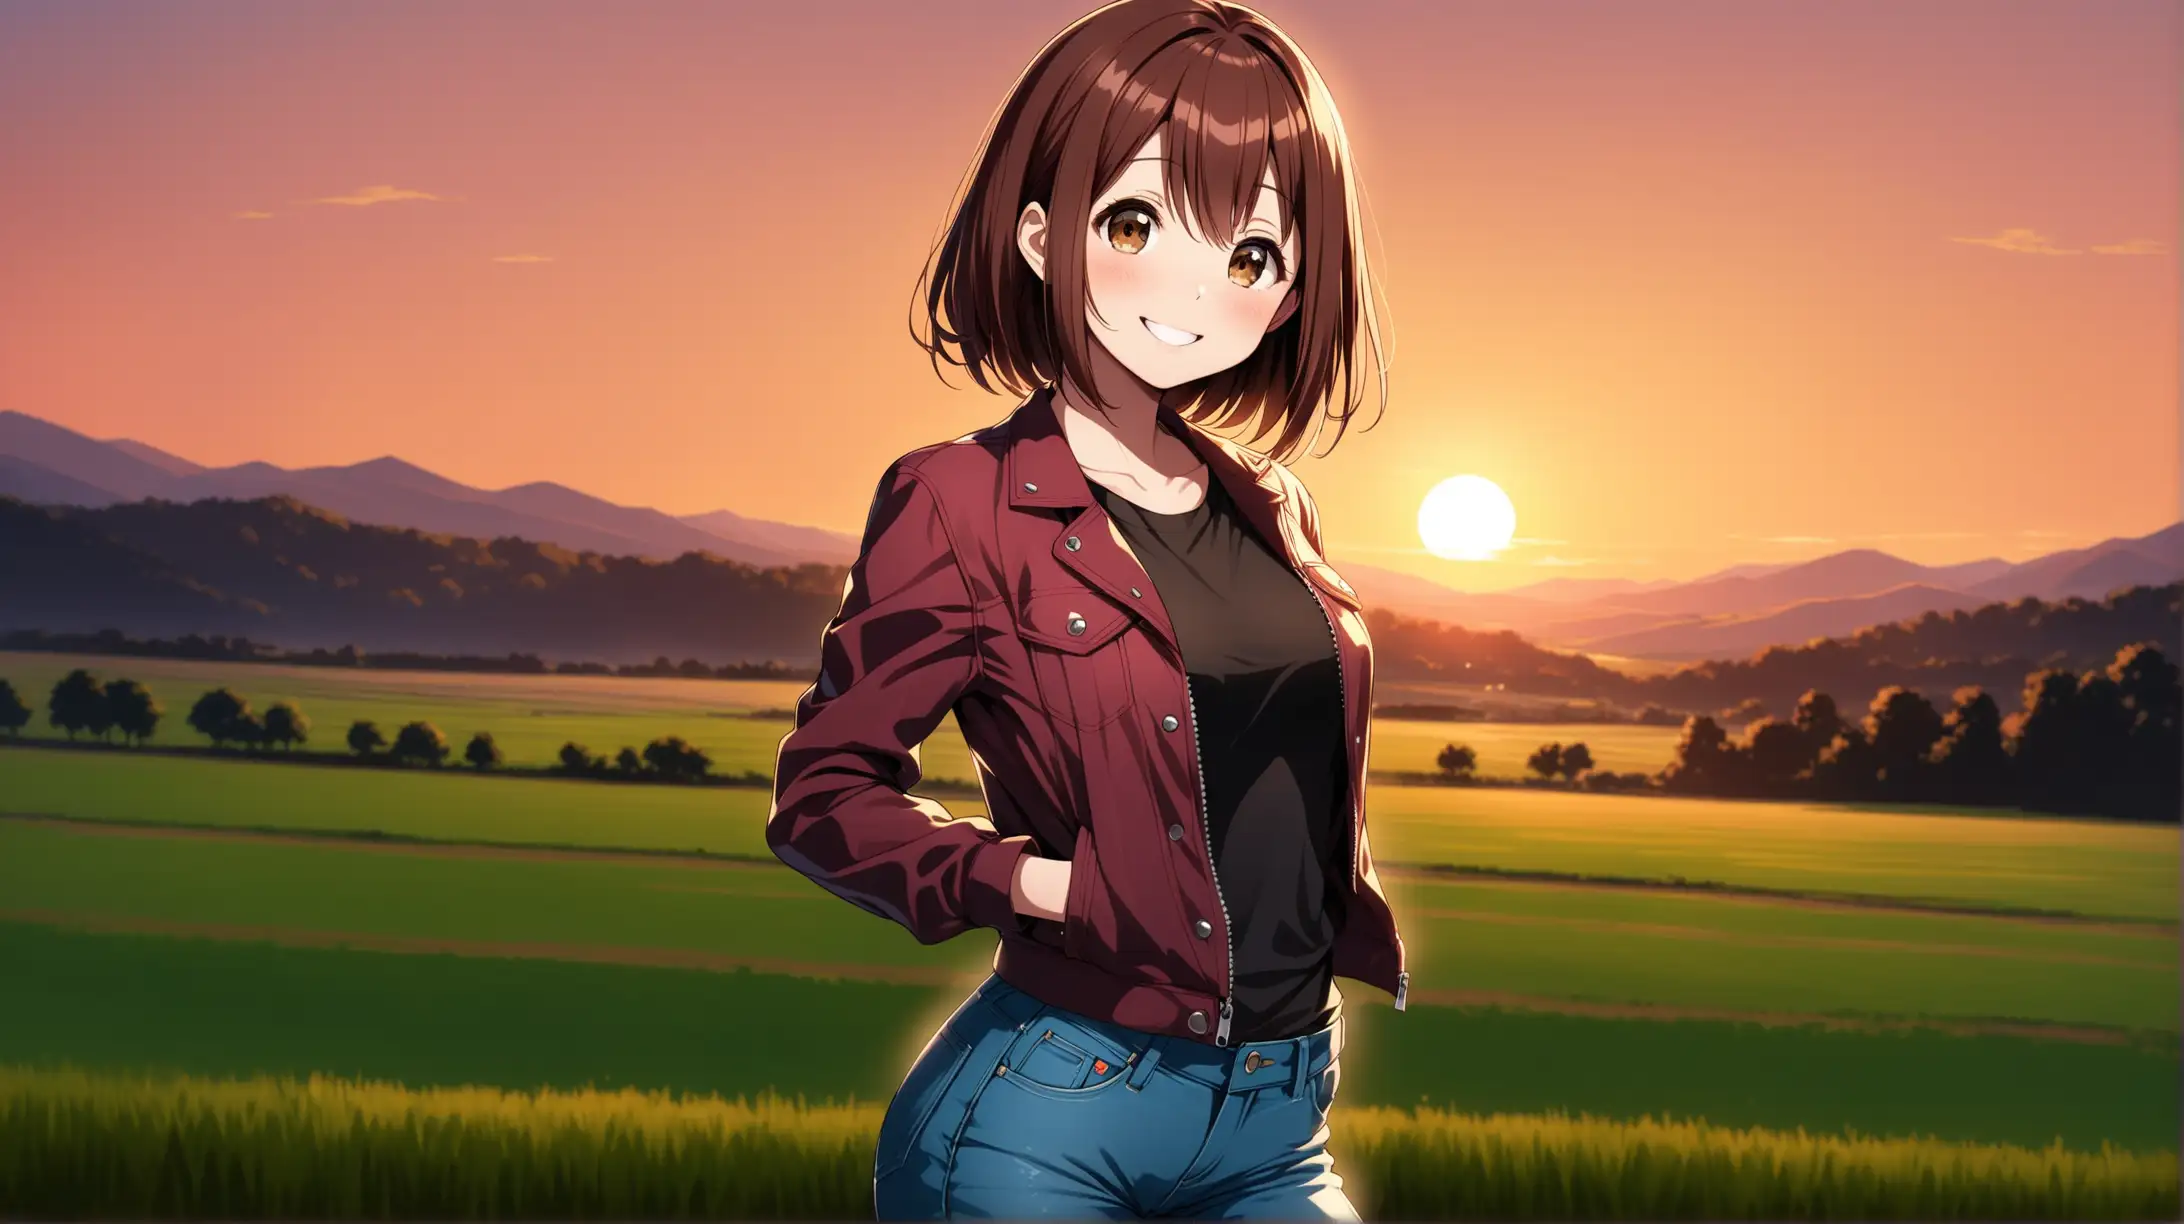 Draw the character Ochaco Uraraka, brown hair, dark brown eyes, high quality, long shot, ambient lighting, outdoors, countryside, seductive pose, jeans and a jacket, smiling